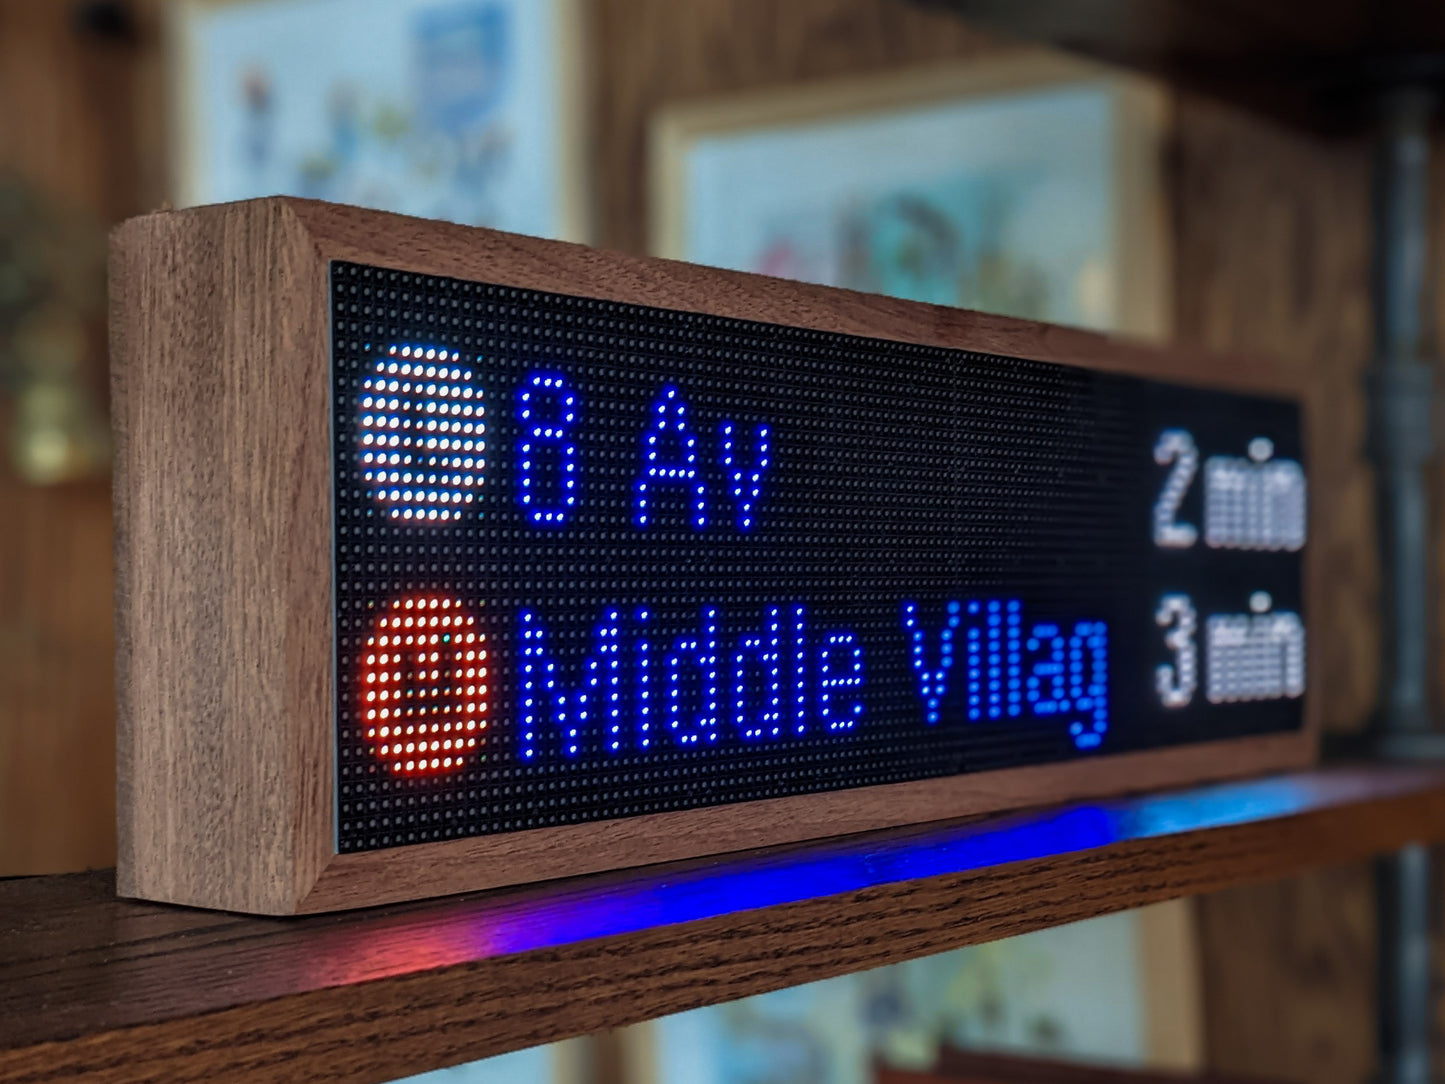 The NYC Realtime Subway Clock is angled on a mahogany shelf. Framed in mahogany the black LED screen features a round white circle with the letter L in it next to the words, 8 Av next to "2 min" on the left side. Directly below, a round orange circle has the letter M in it next to blue "Middle Village" which is next to a white "3 min".